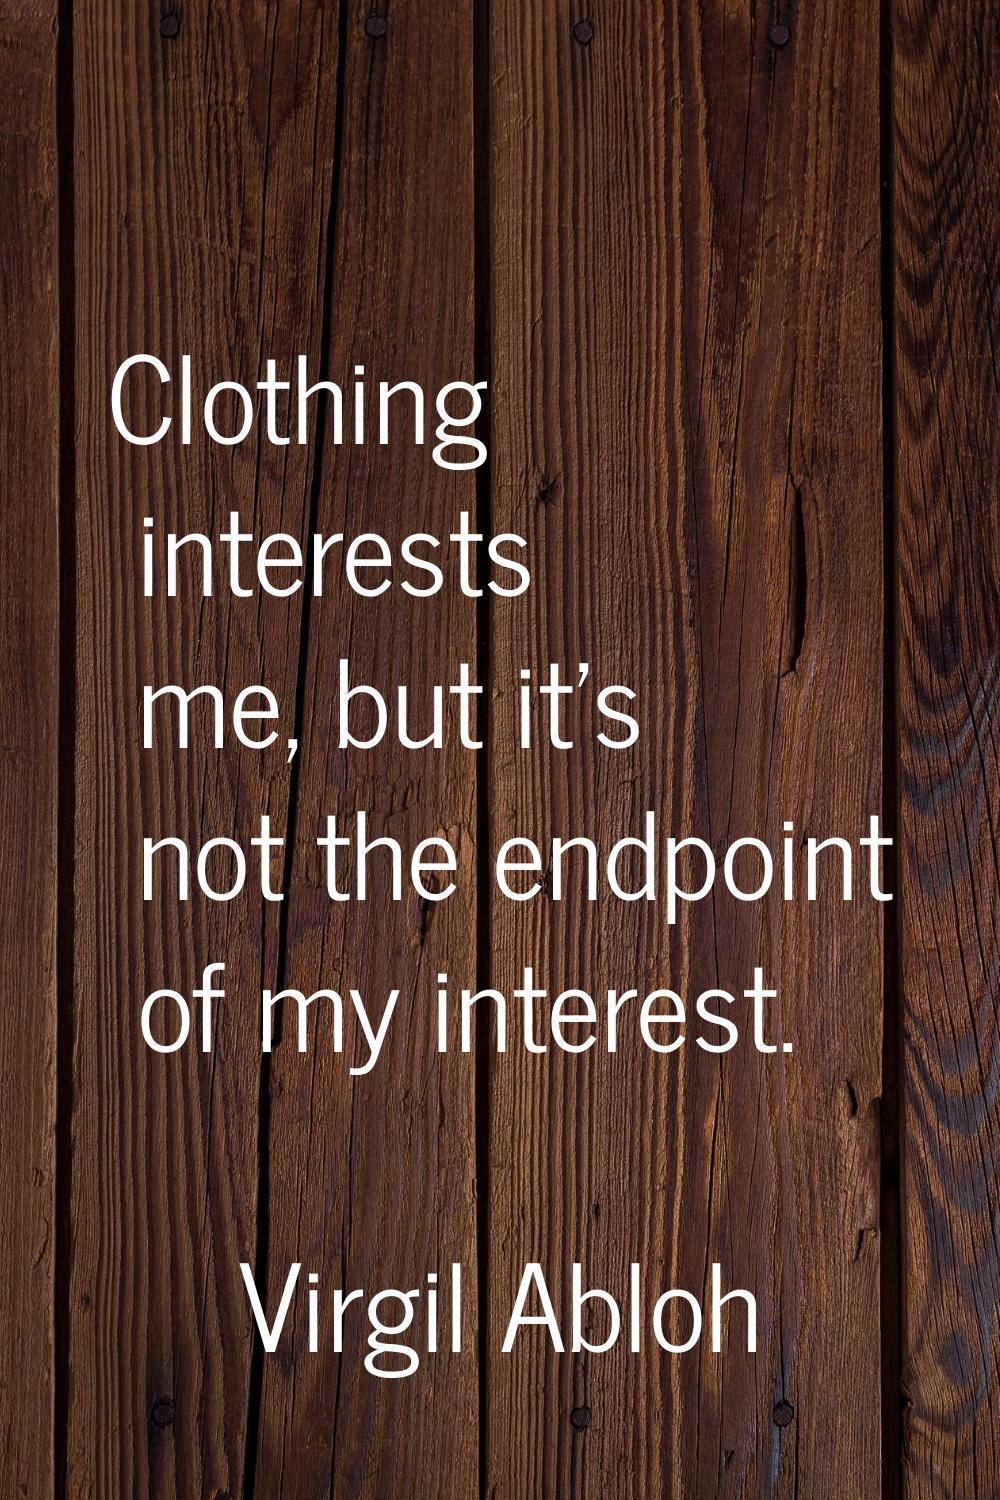 Clothing interests me, but it's not the endpoint of my interest.